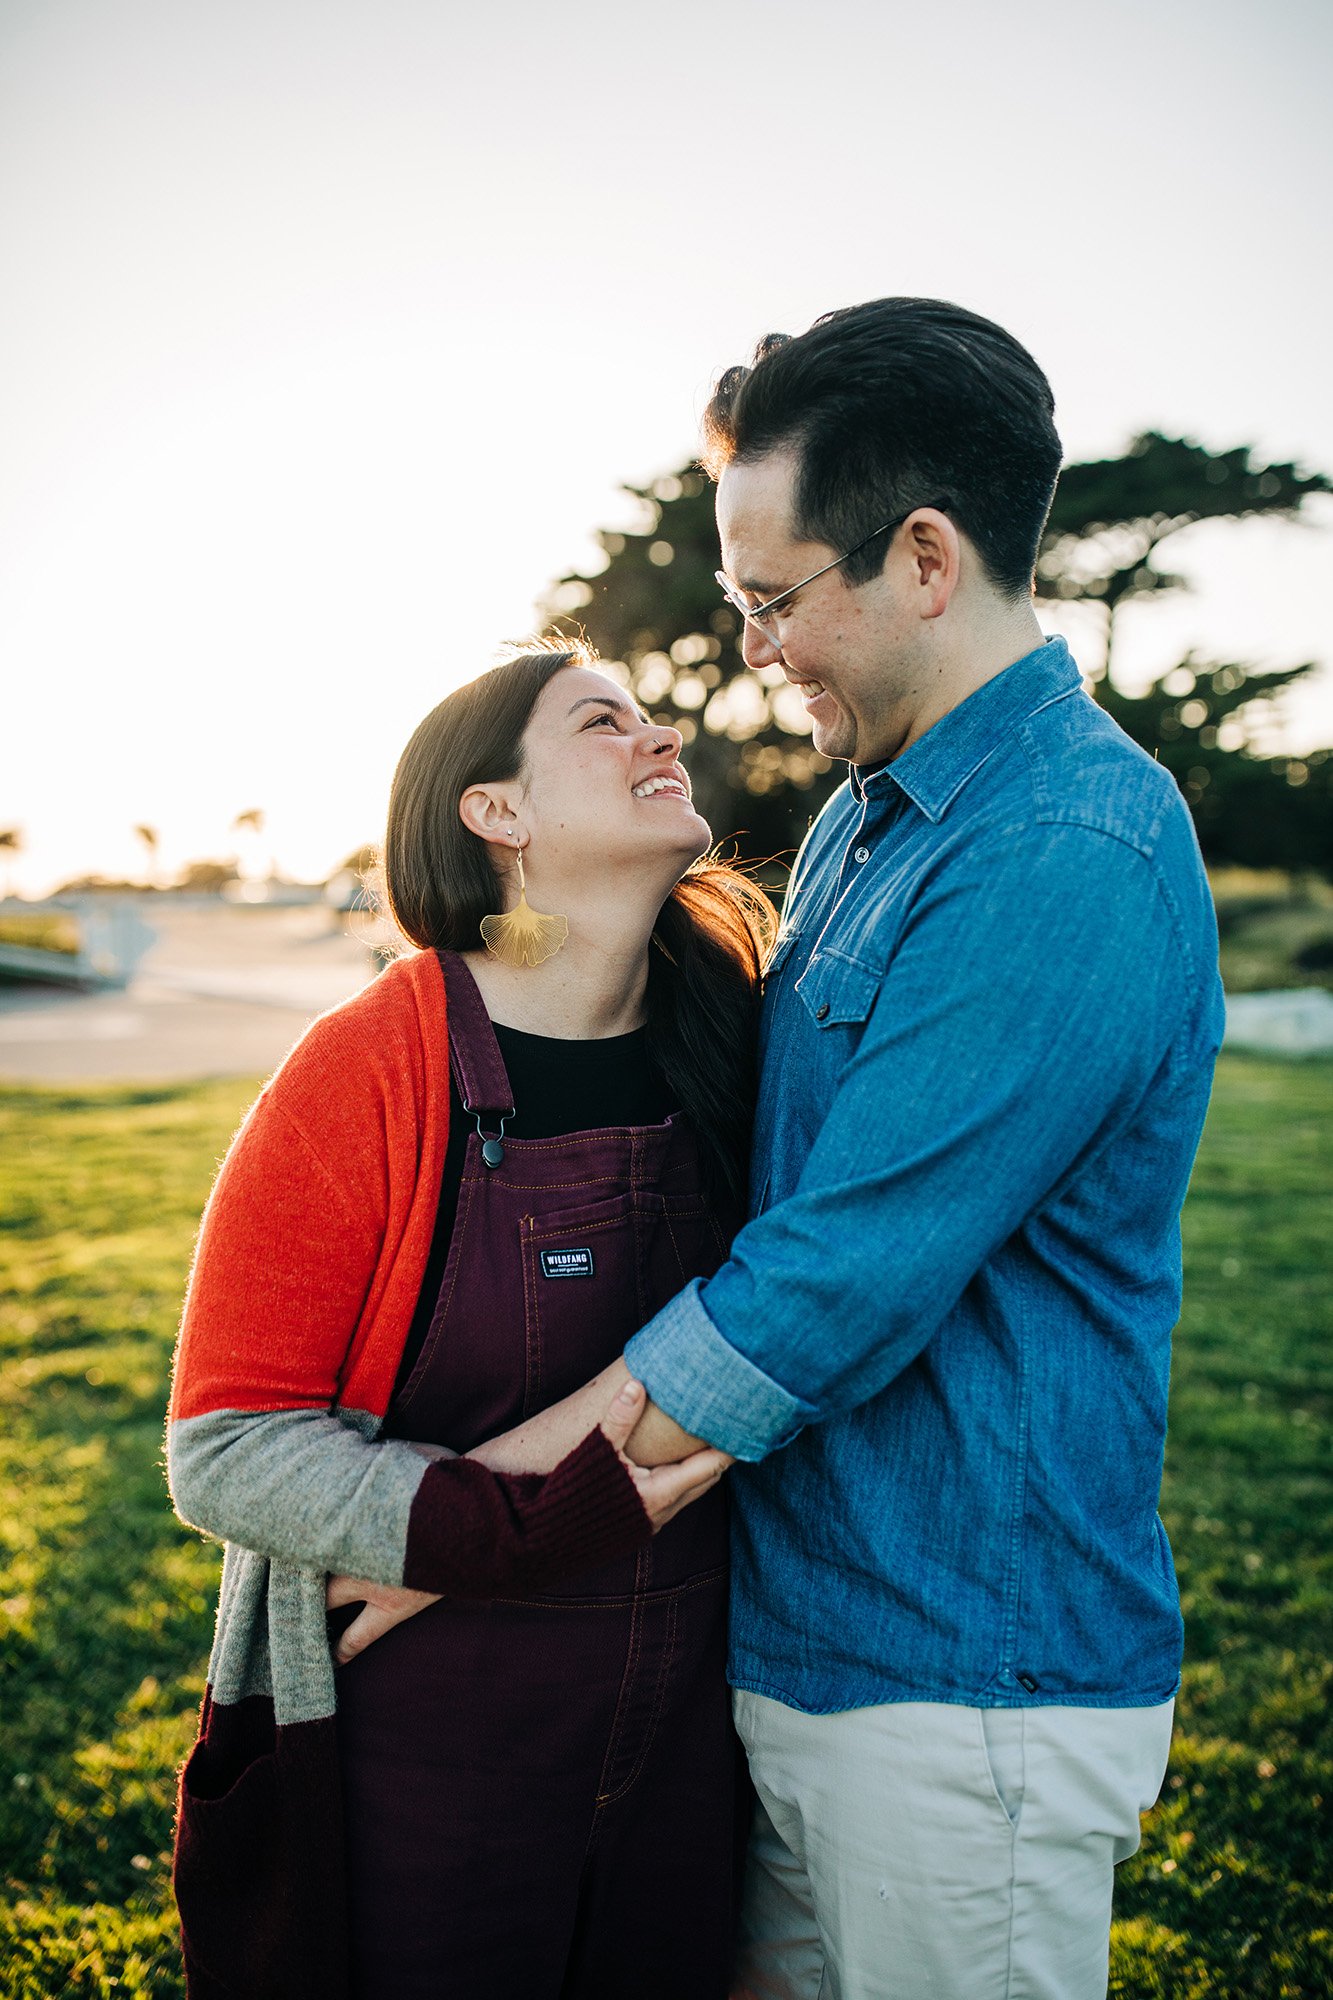 Chloe and Adam cuddle together on the greenery in front of a lighthouse in Santa Cruz, California.